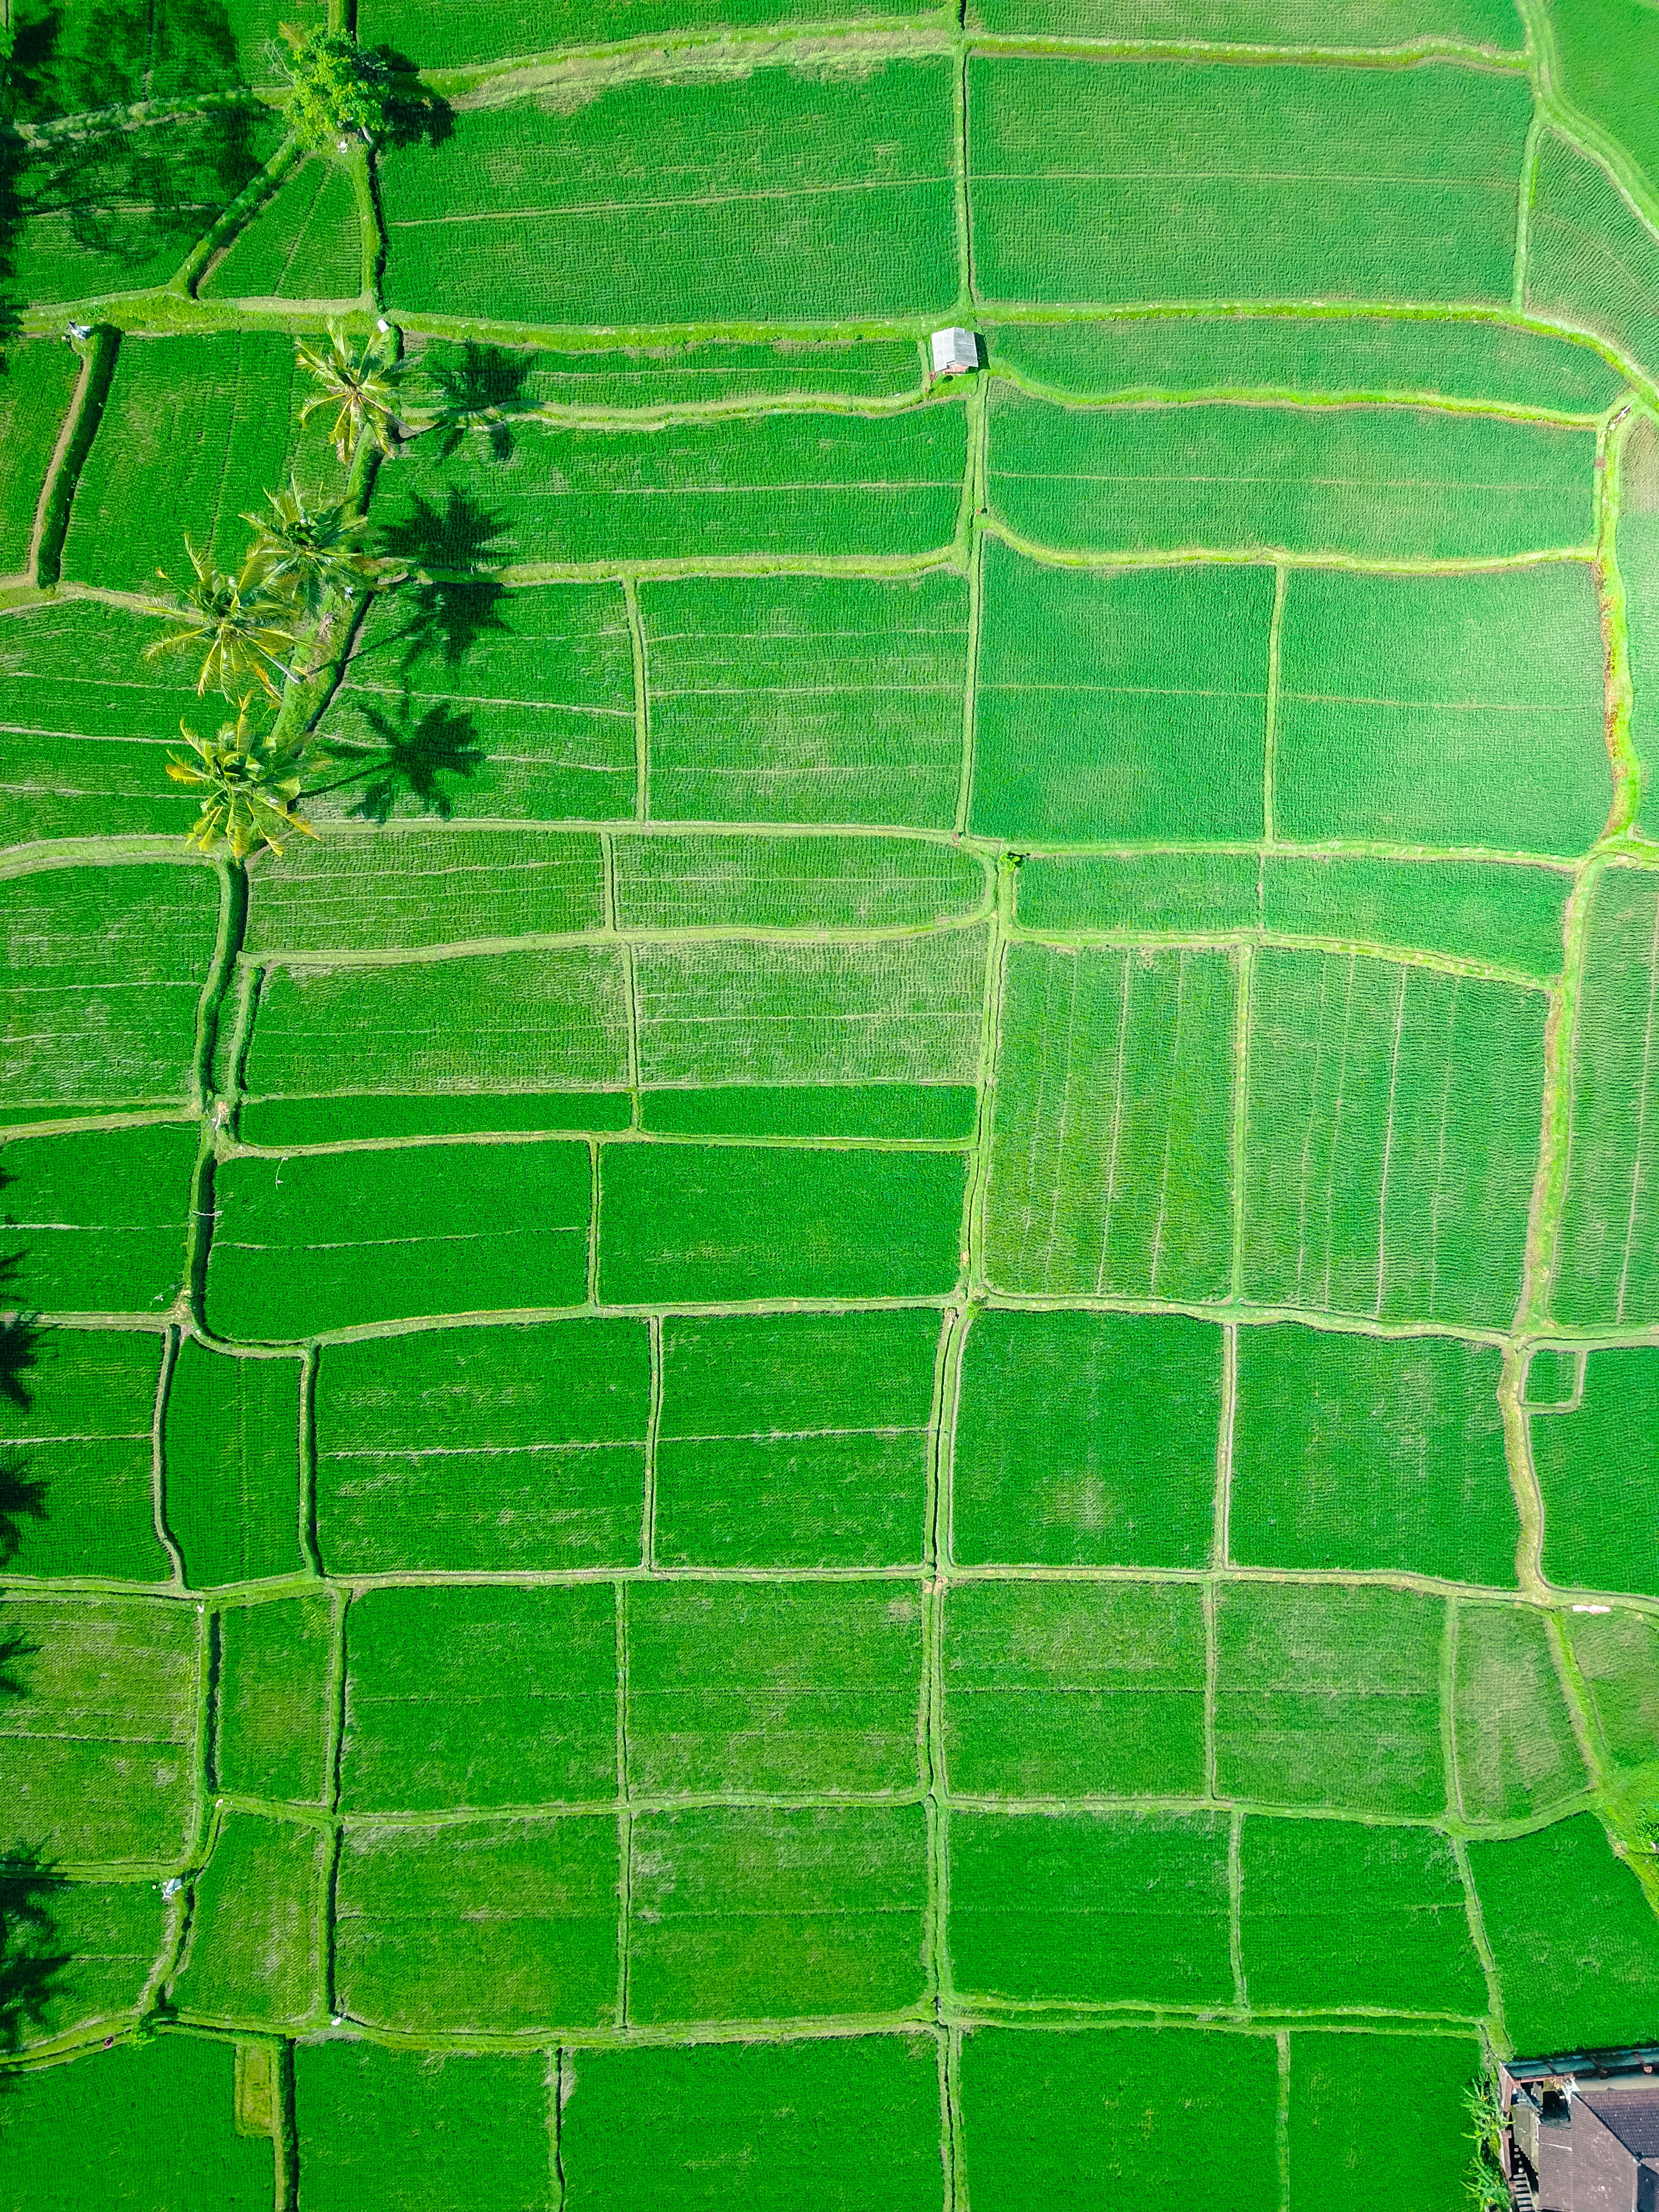 indonesia, fields, nature, palms, green, ubud wallpaper for mobile